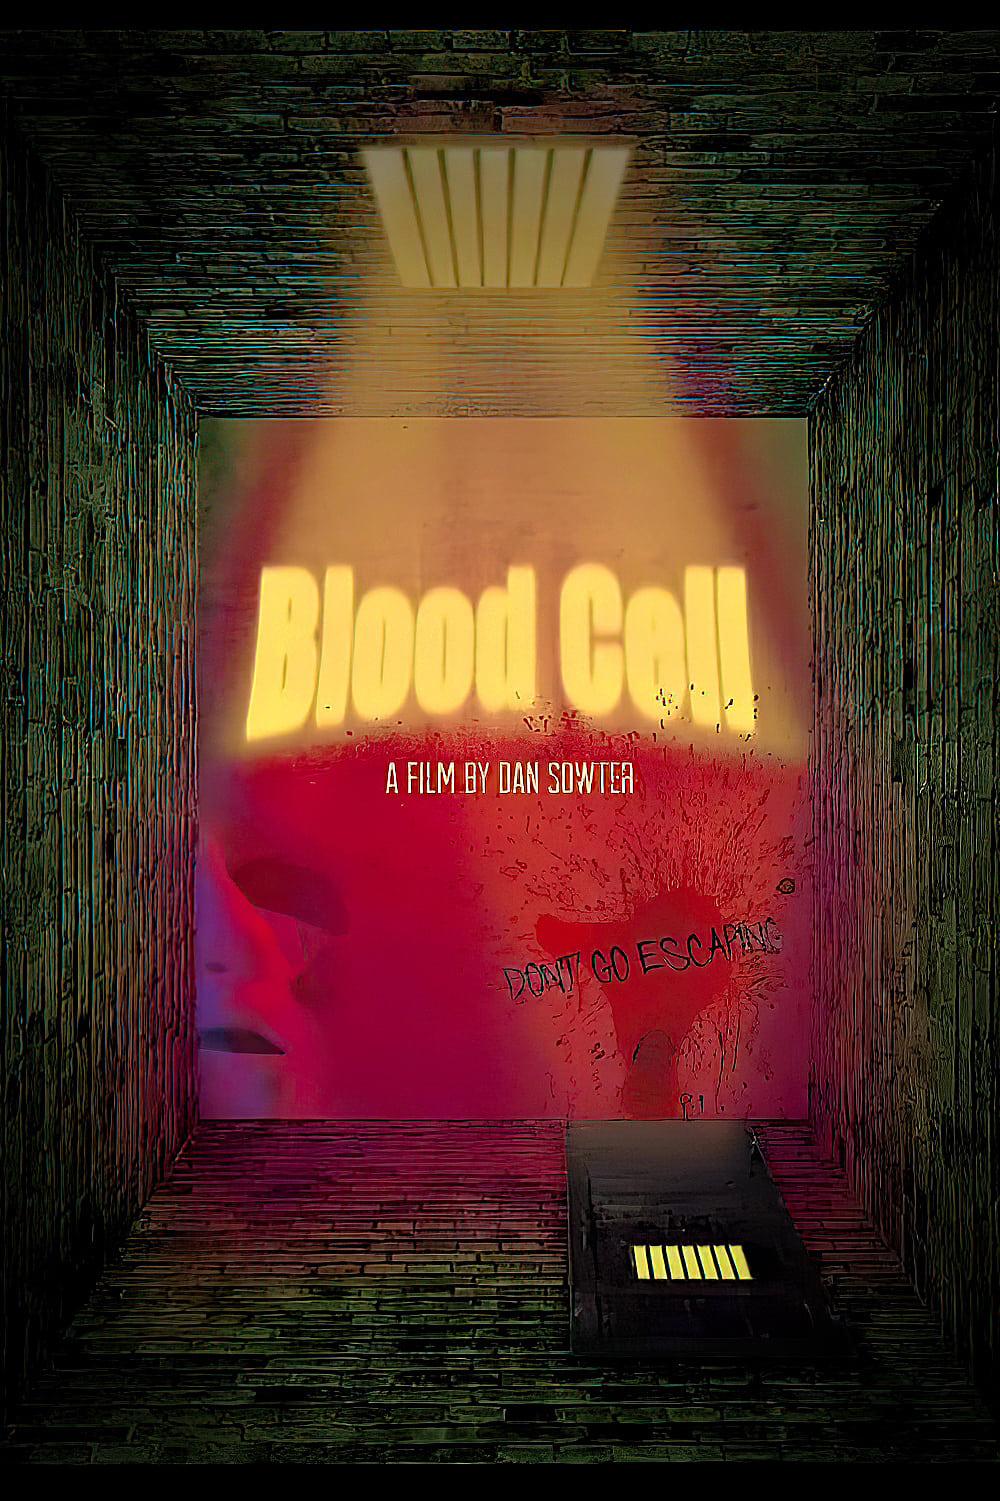 Blood Cell poster